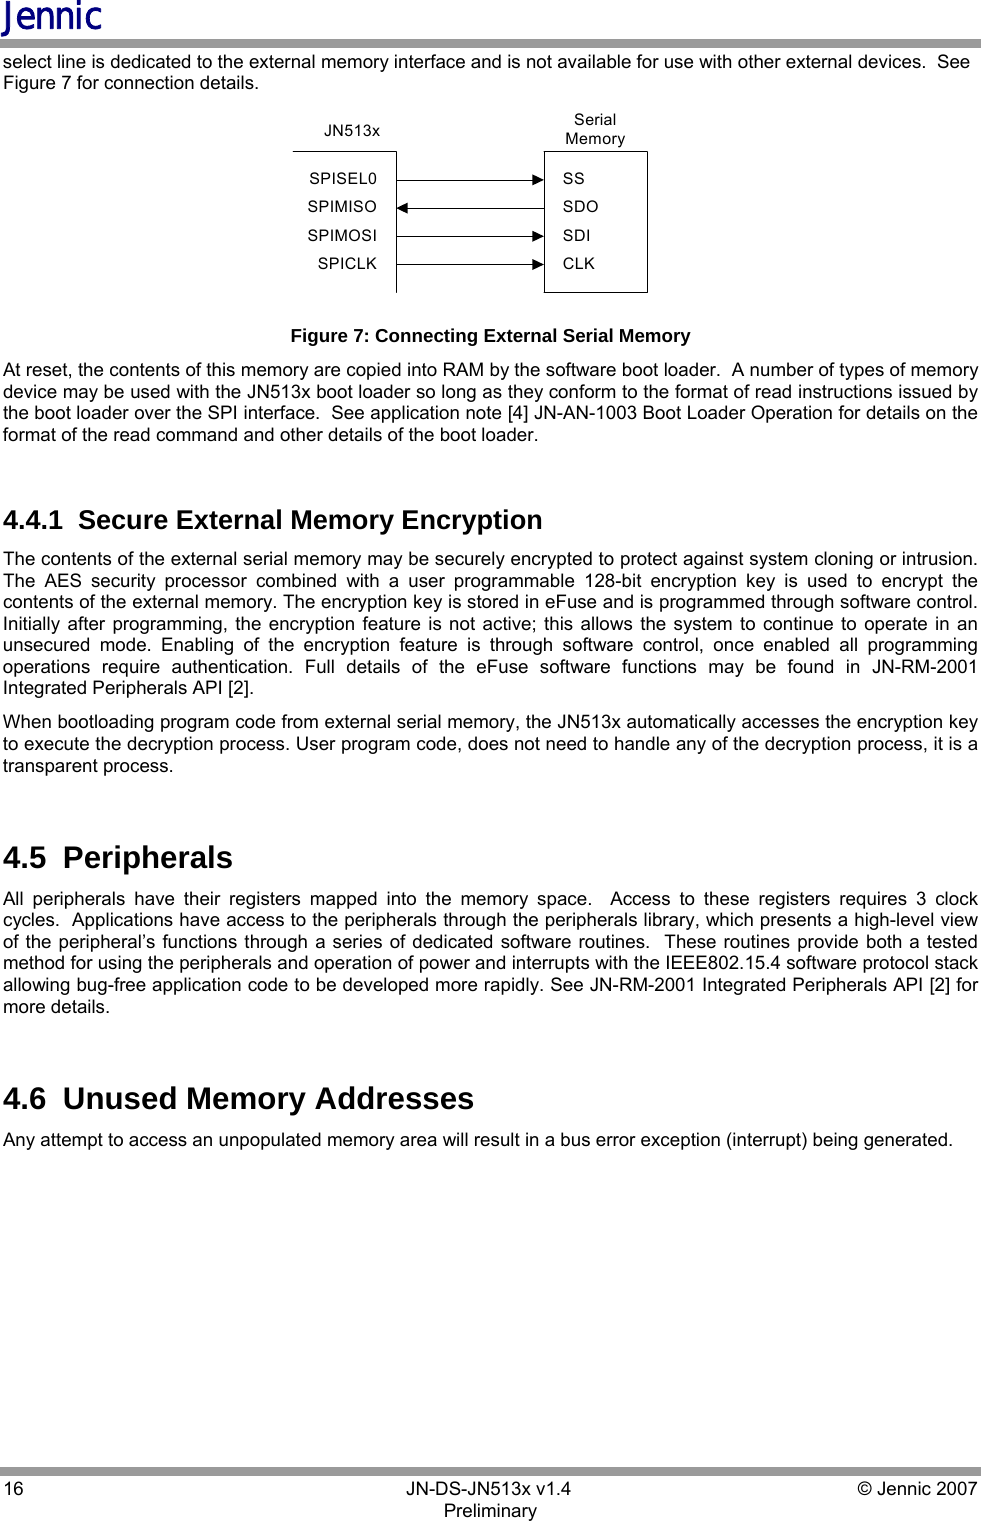 Jennic 16        JN-DS-JN513x v1.4  © Jennic 2007 Preliminary select line is dedicated to the external memory interface and is not available for use with other external devices.  See Figure 7 for connection details. JN513x SerialMemorySPISEL0SPIMISOSPIMOSISPICLKSSSDOSDICLK Figure 7: Connecting External Serial Memory At reset, the contents of this memory are copied into RAM by the software boot loader.  A number of types of memory device may be used with the JN513x boot loader so long as they conform to the format of read instructions issued by the boot loader over the SPI interface.  See application note [4] JN-AN-1003 Boot Loader Operation for details on the format of the read command and other details of the boot loader.  4.4.1  Secure External Memory Encryption The contents of the external serial memory may be securely encrypted to protect against system cloning or intrusion. The AES security processor combined with a user programmable 128-bit encryption key is used to encrypt the contents of the external memory. The encryption key is stored in eFuse and is programmed through software control.  Initially after programming, the encryption feature is not active; this allows the system to continue to operate in an unsecured mode. Enabling of the encryption feature is through software control, once enabled all programming operations require authentication. Full details of the eFuse software functions may be found in JN-RM-2001 Integrated Peripherals API [2]. When bootloading program code from external serial memory, the JN513x automatically accesses the encryption key to execute the decryption process. User program code, does not need to handle any of the decryption process, it is a transparent process.  4.5  Peripherals All peripherals have their registers mapped into the memory space.  Access to these registers requires 3 clock cycles.  Applications have access to the peripherals through the peripherals library, which presents a high-level view of the peripheral’s functions through a series of dedicated software routines.  These routines provide both a tested method for using the peripherals and operation of power and interrupts with the IEEE802.15.4 software protocol stack allowing bug-free application code to be developed more rapidly. See JN-RM-2001 Integrated Peripherals API [2] for more details.  4.6  Unused Memory Addresses Any attempt to access an unpopulated memory area will result in a bus error exception (interrupt) being generated.  